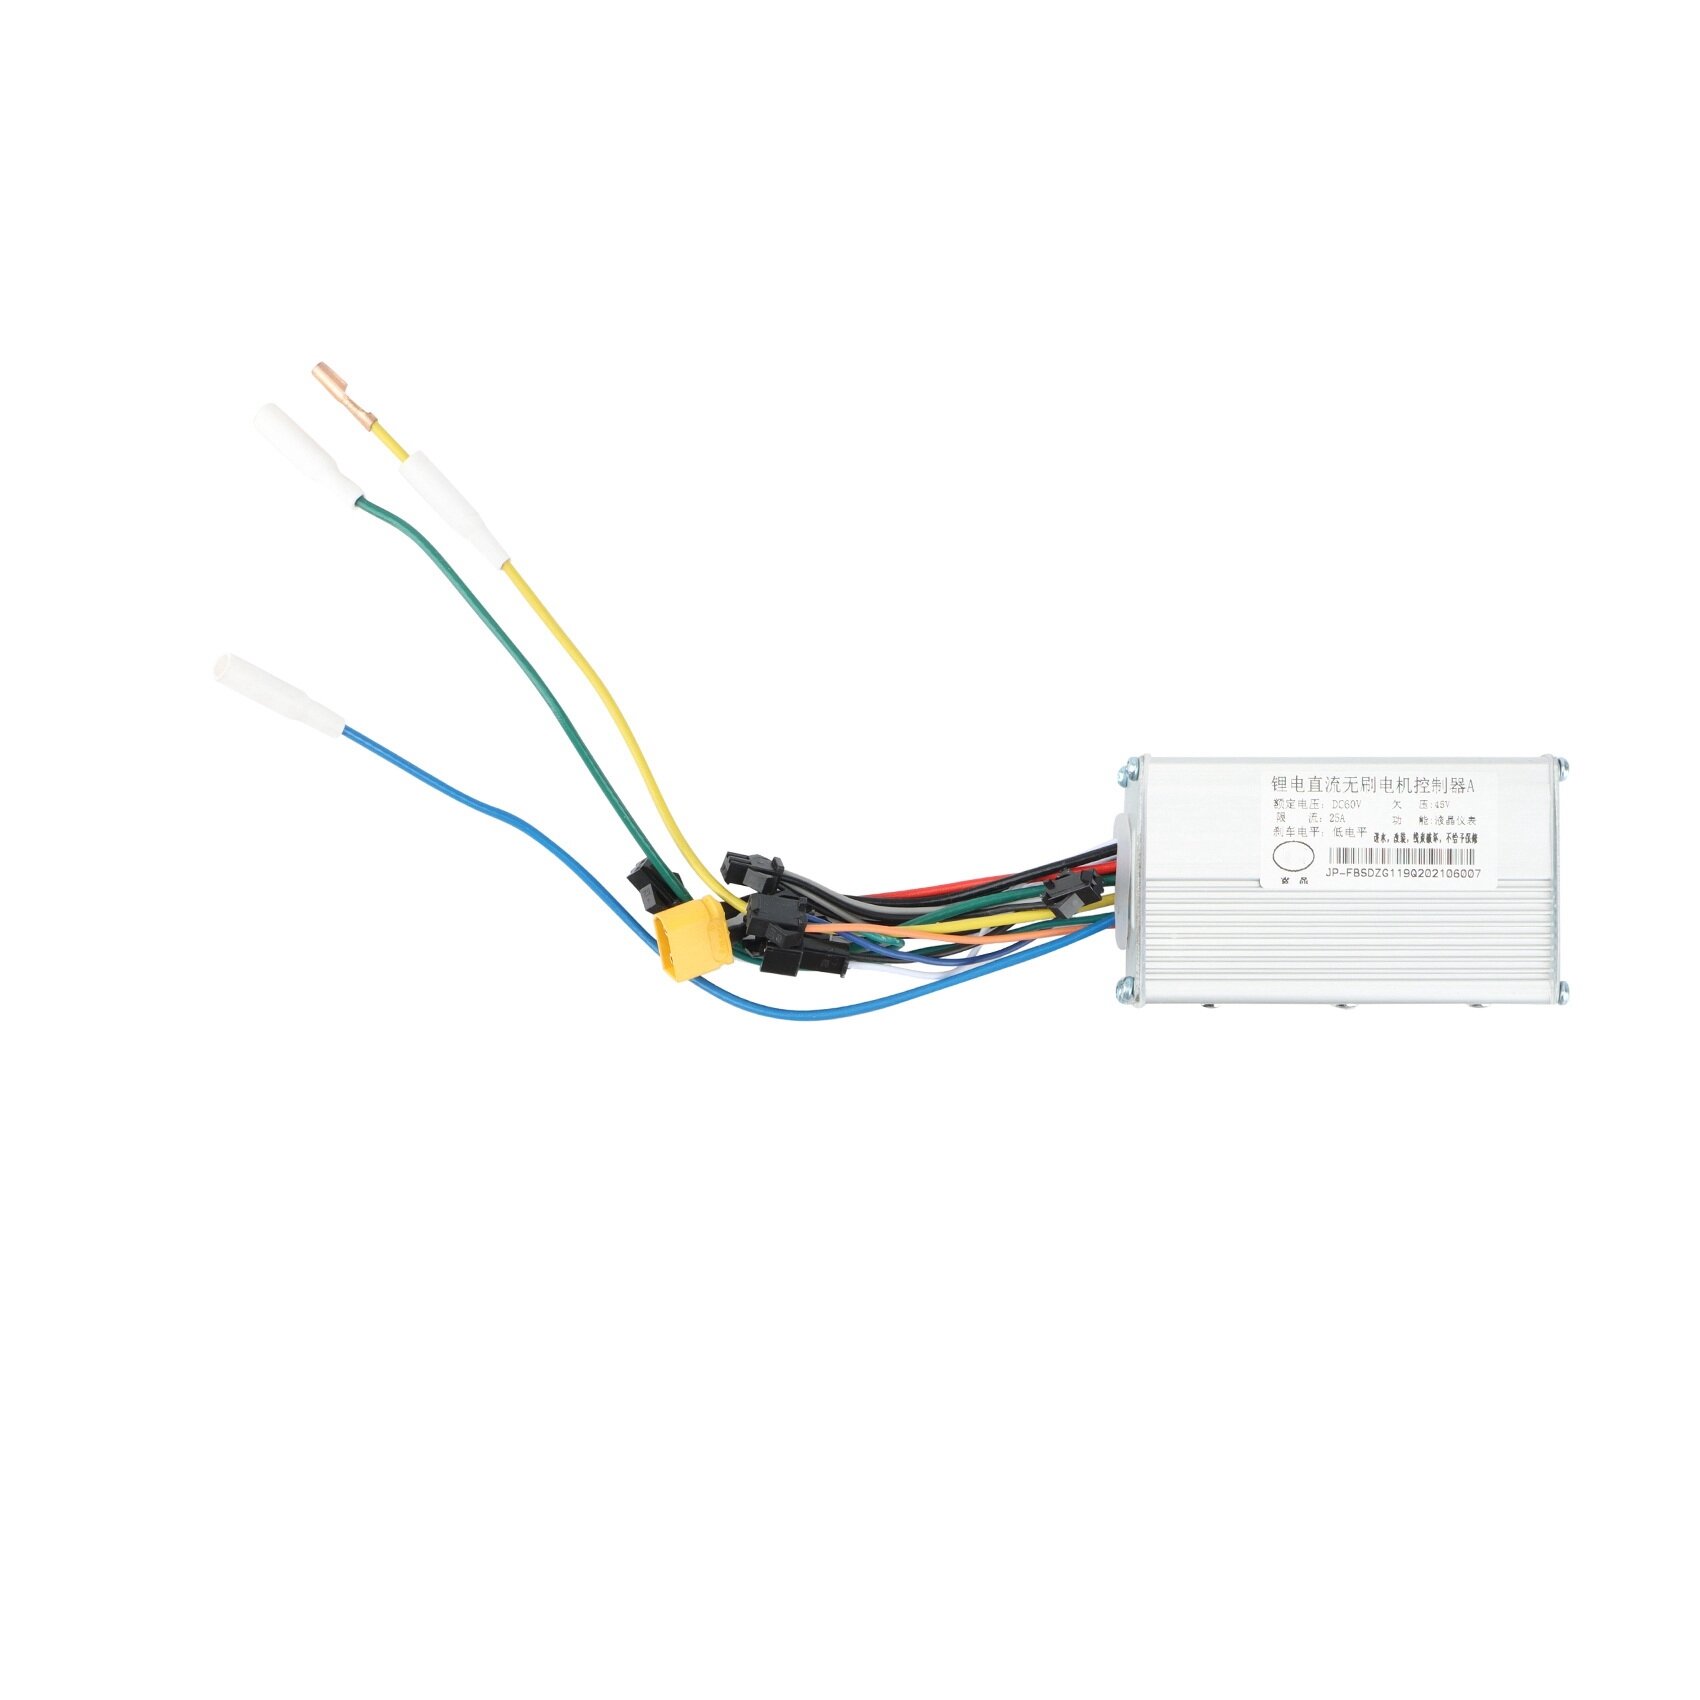 

JP 60V 25A Controller DC Brushless Motor Controller Lithium Battery Controller For LAOTIE SR10 Zero X10 60V Scooter